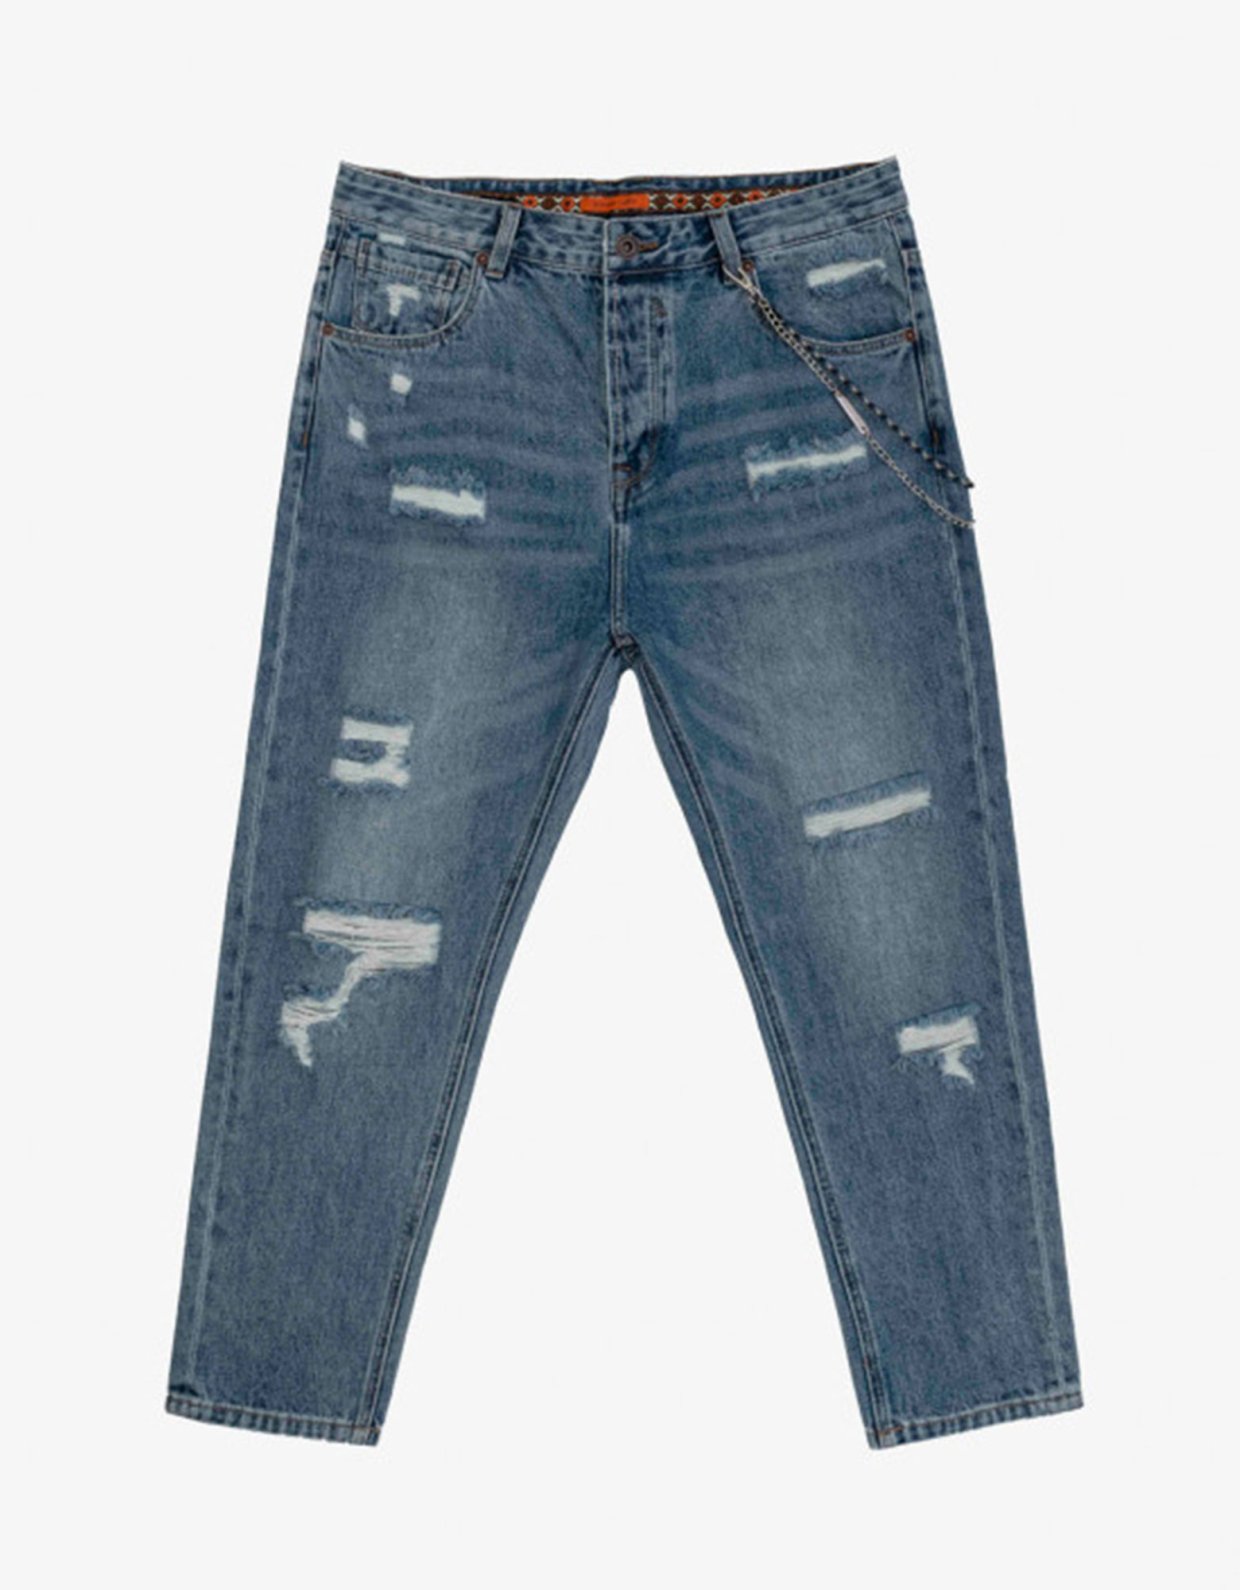 Gianni Lupo Mike carrot cropped denim pants